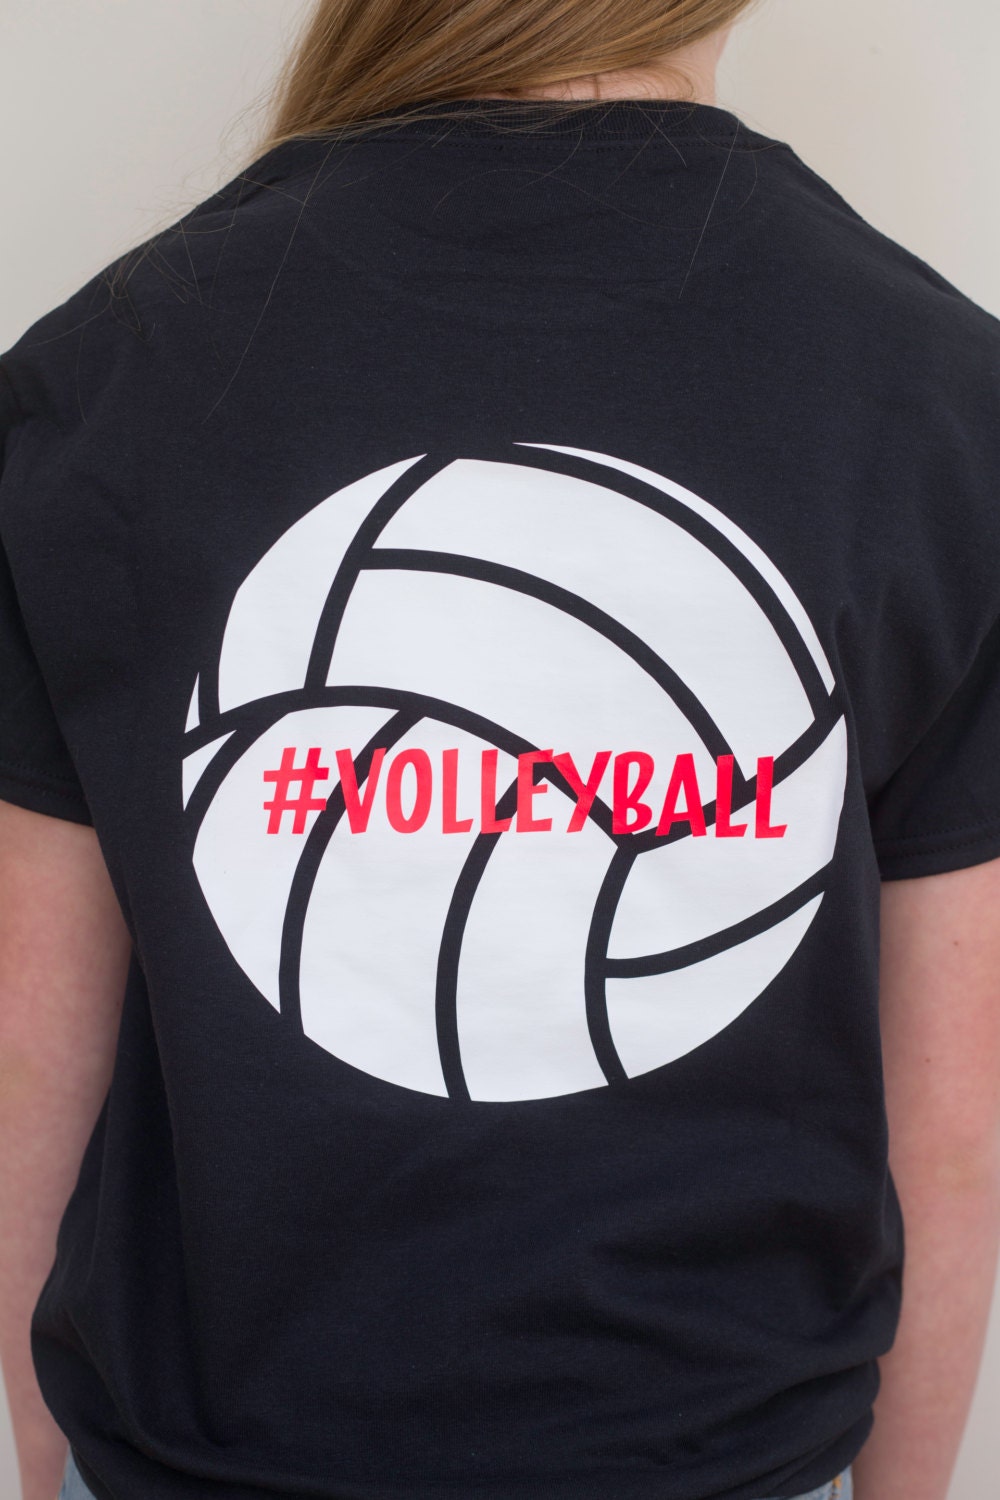 Girls Womens Volleyball Shirt Hashtag by SweetDesignsBtque on Etsy